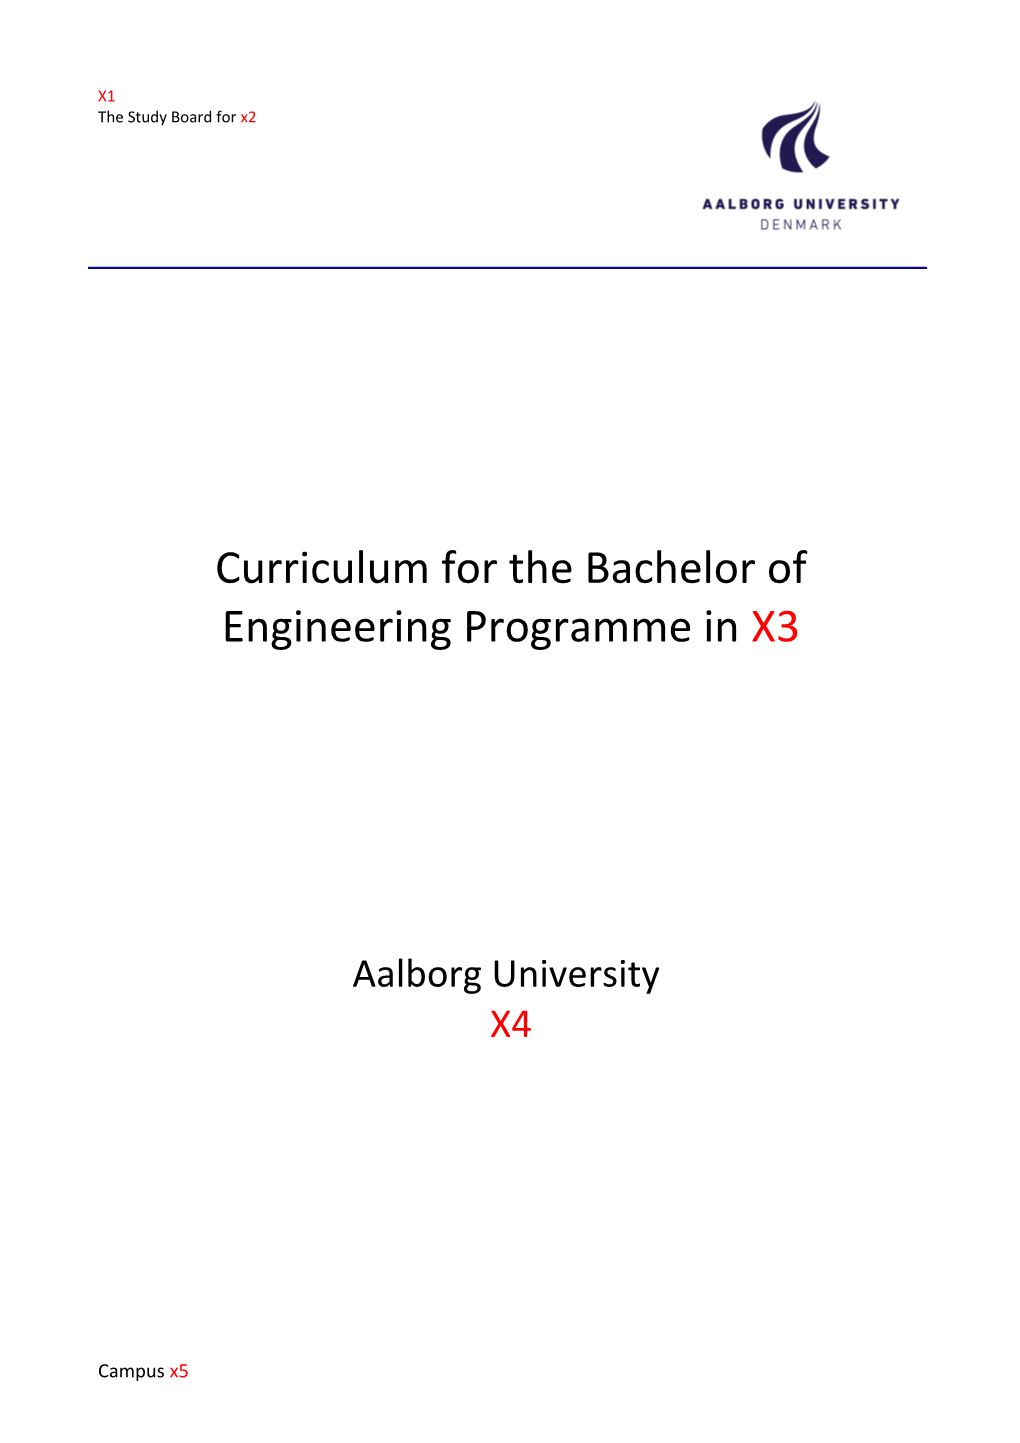 Curriculum for the Bachelor of Engineering Programme in X3